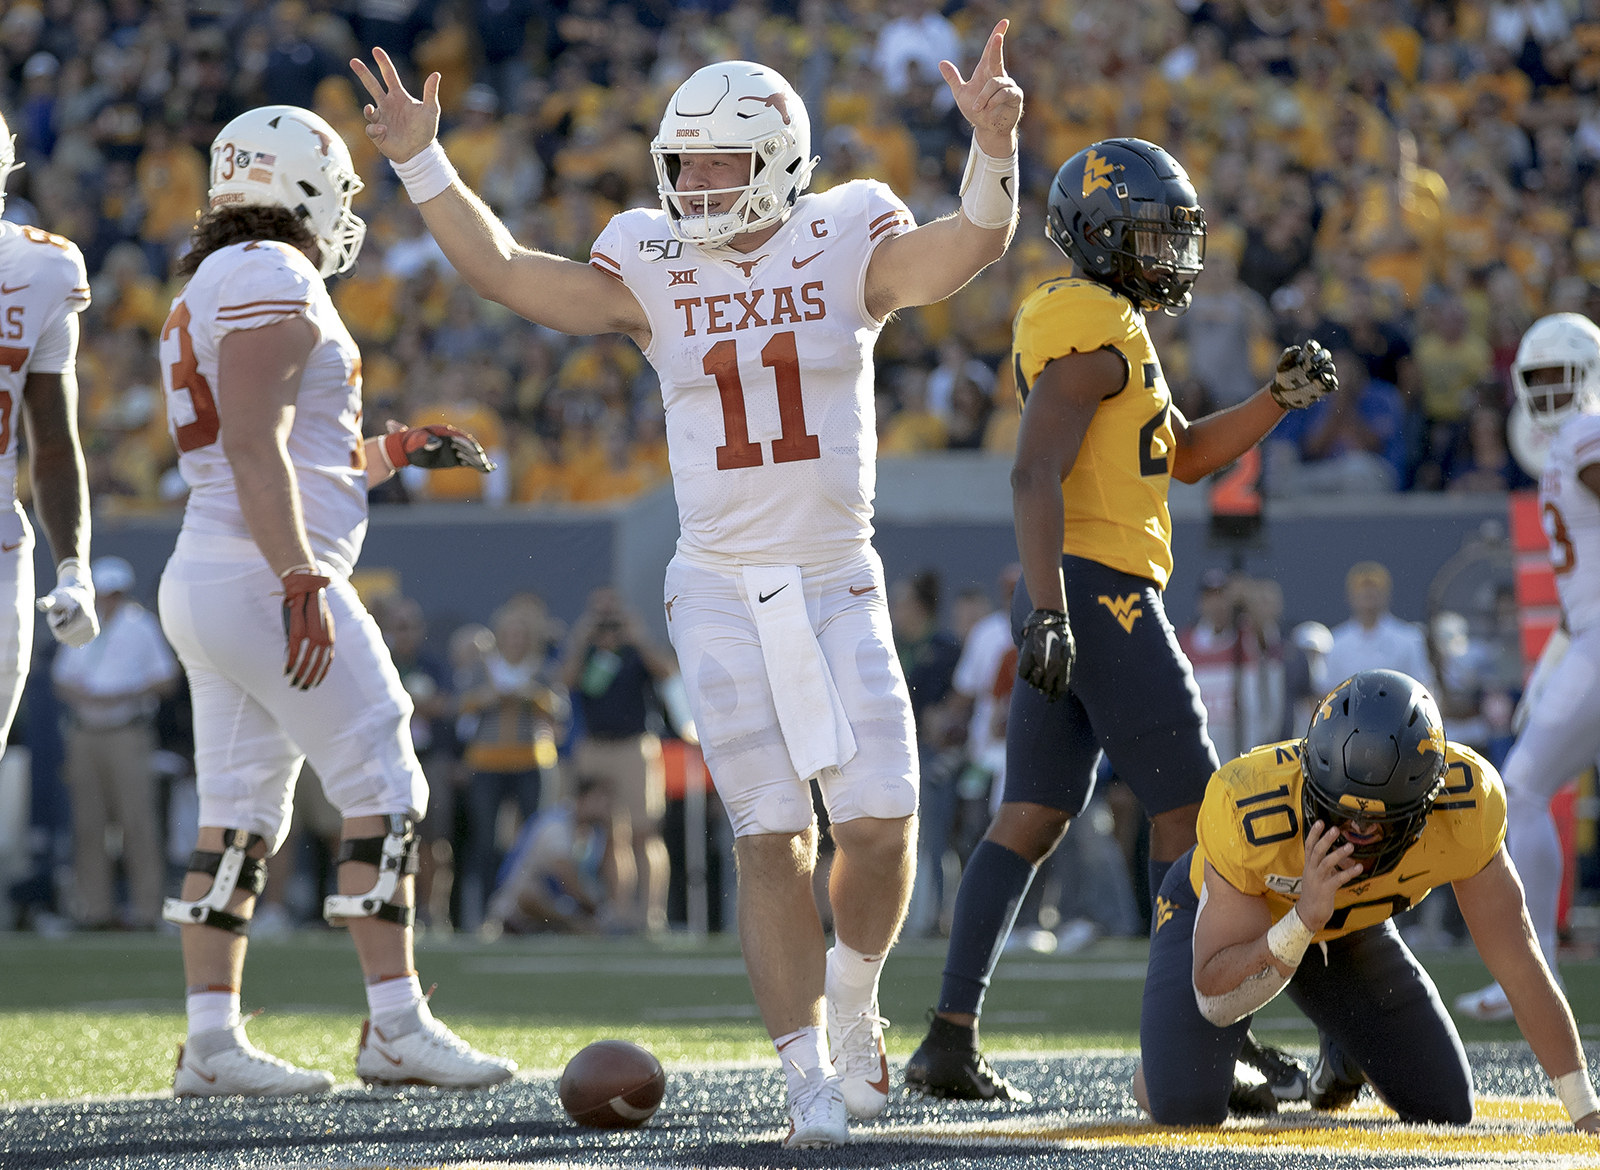 Texas managed to fend off a feisty West Virginia team on the road thanks to...